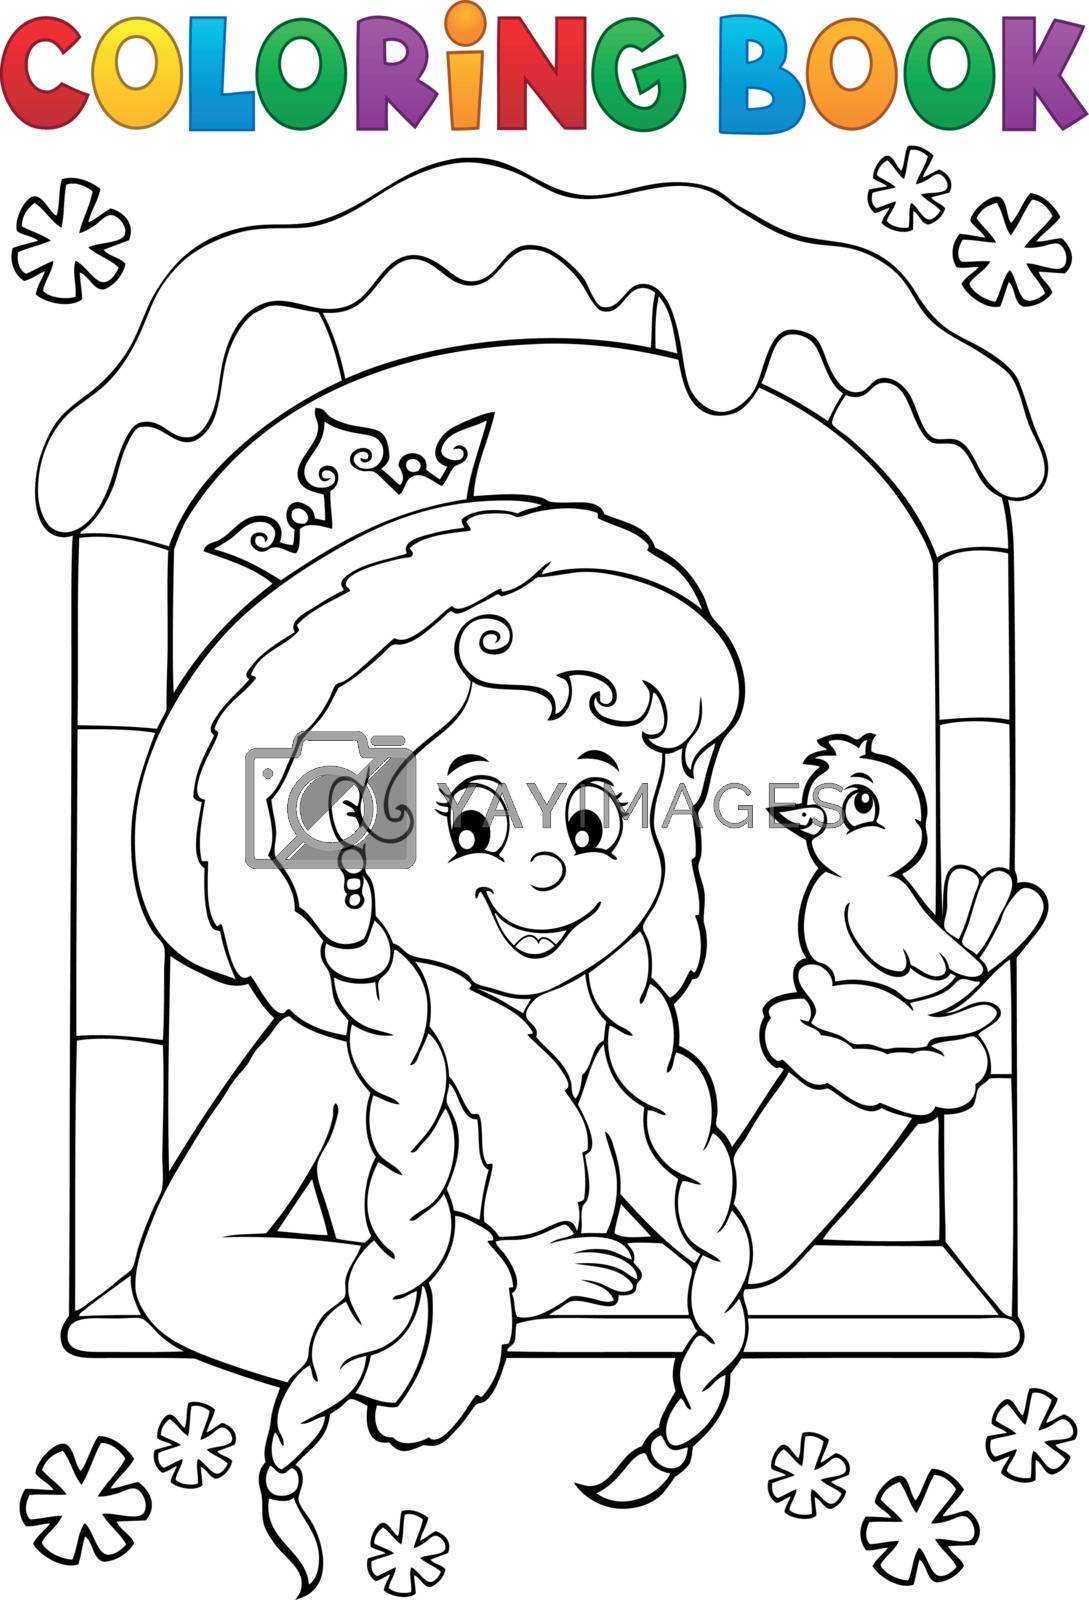 Royalty free image of Coloring book princess in winter window by clairev